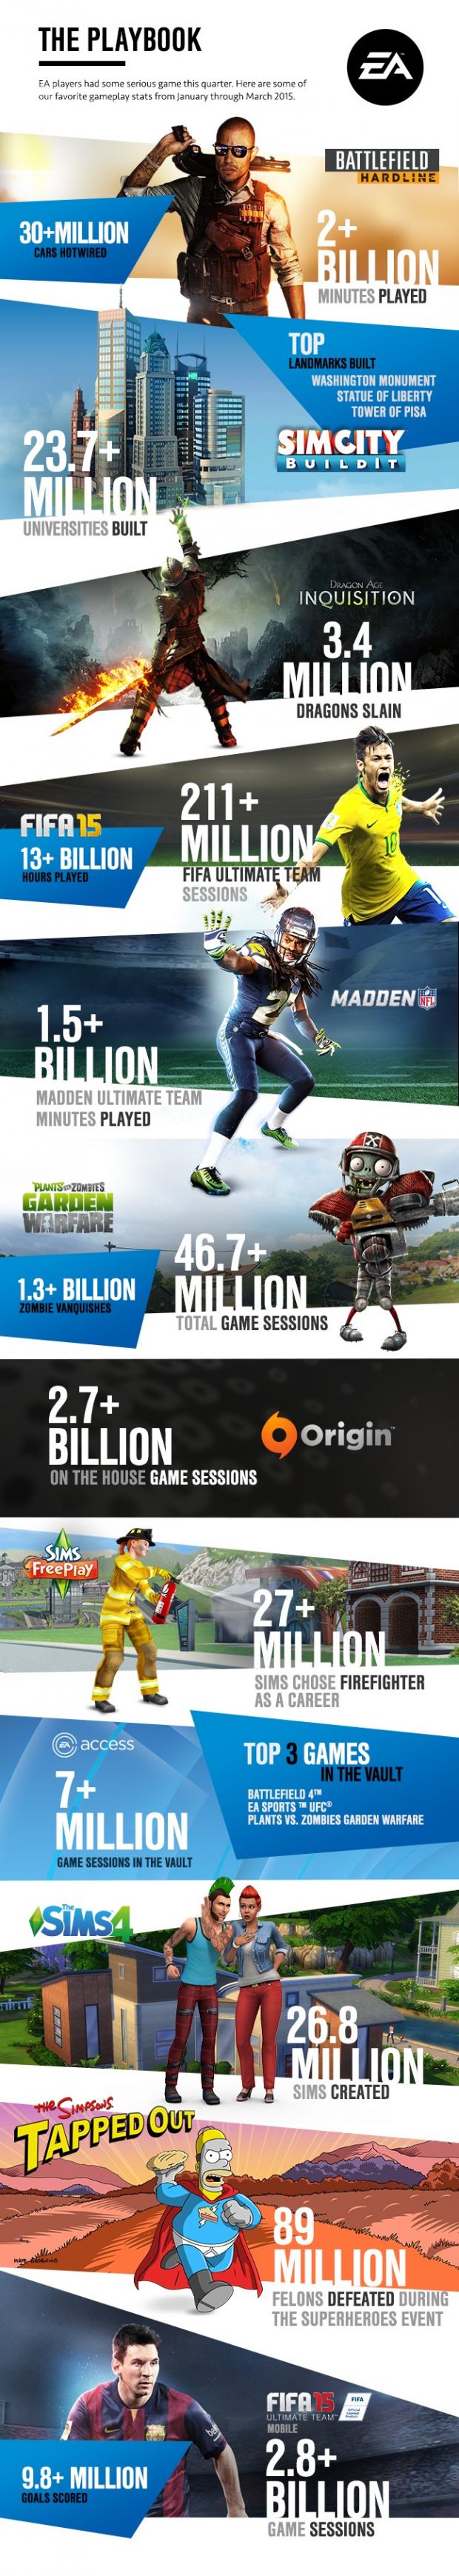 Stat time for Electronic Arts